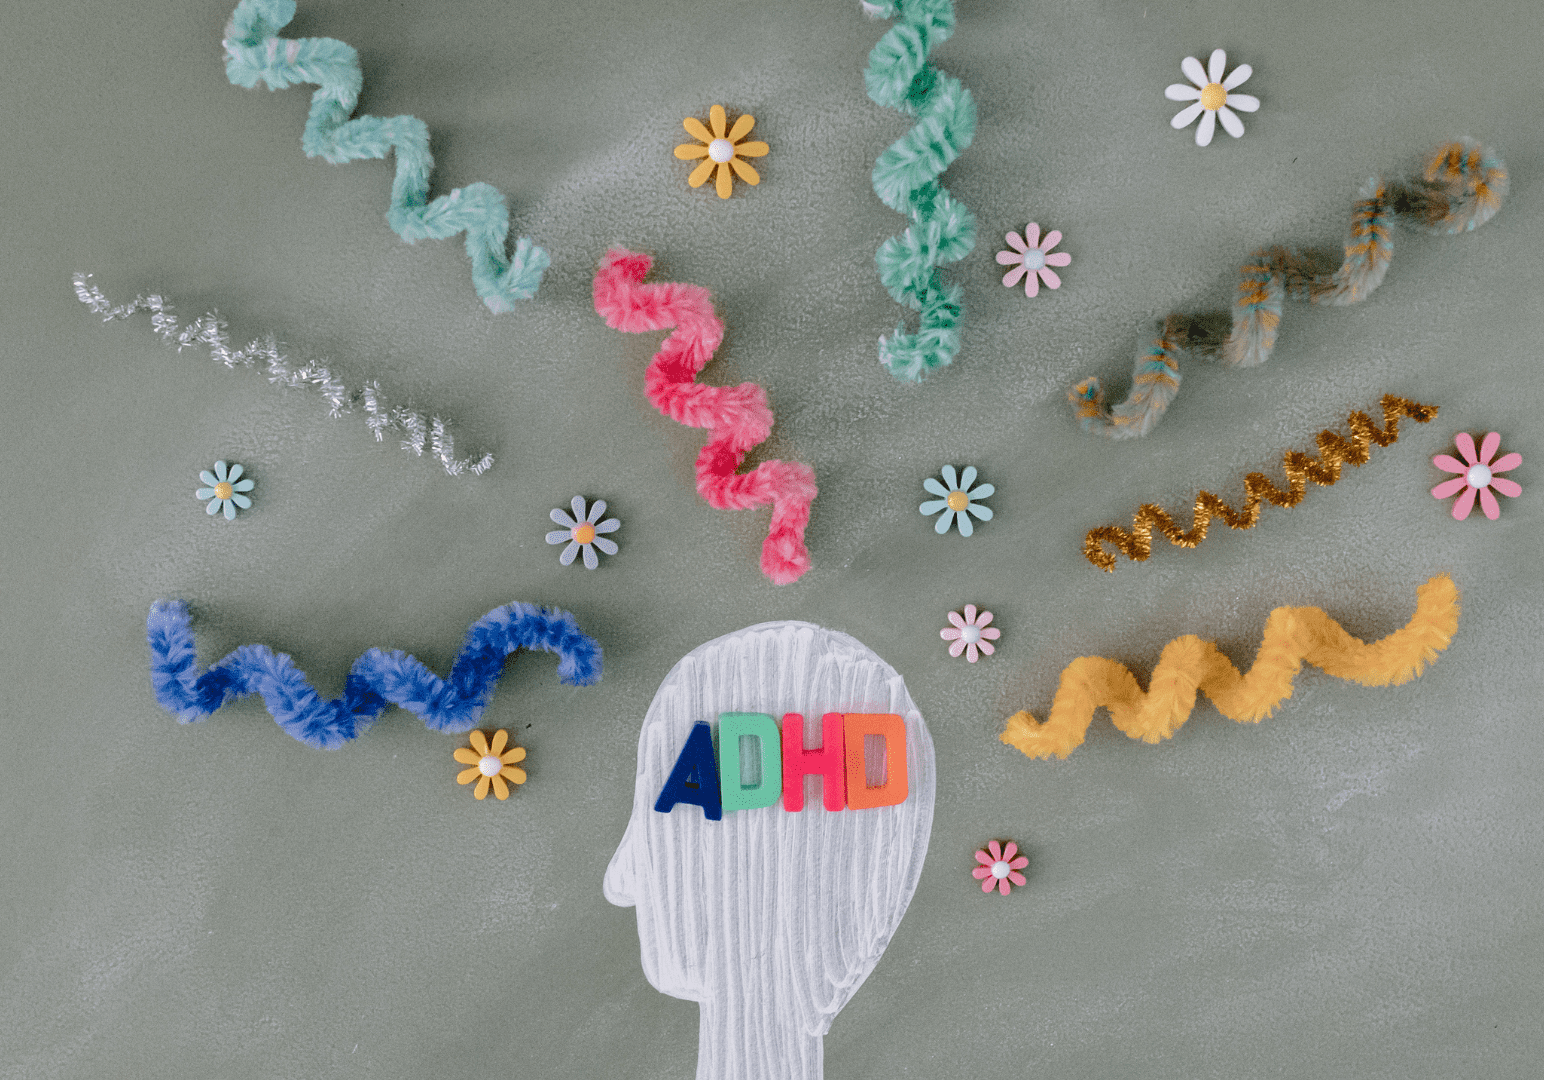 A head with the word adhd written on it surrounded by colorful yarn.